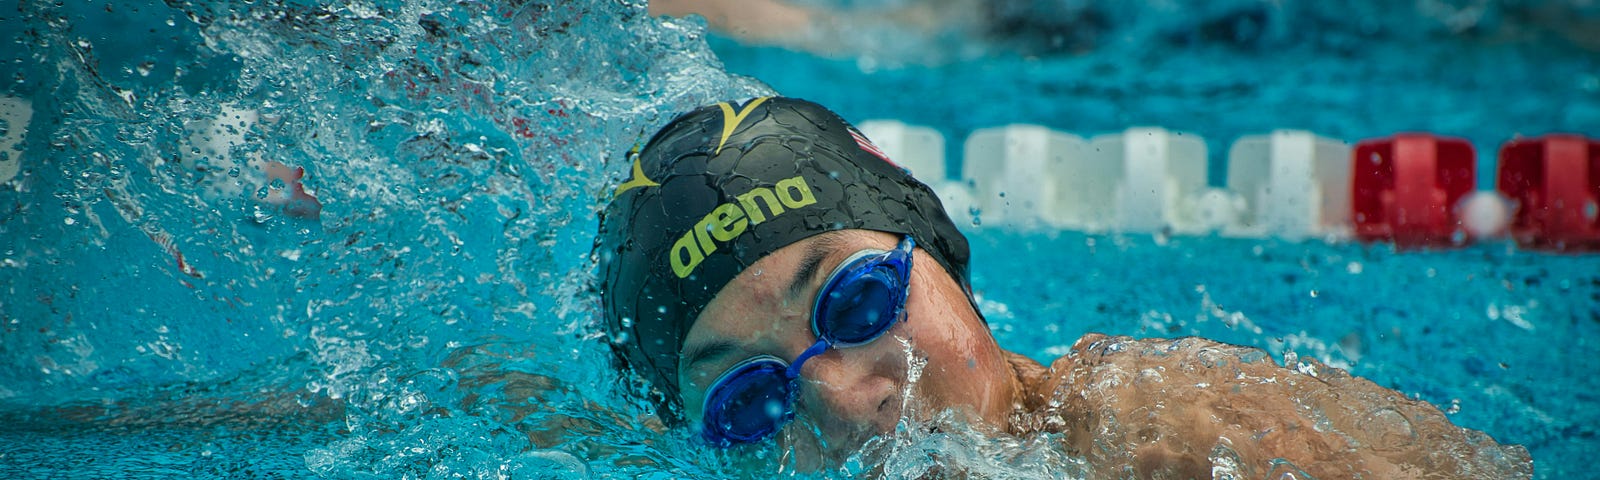 Swimmer in pool, on side, wearing a black swim cap and blue goggles.